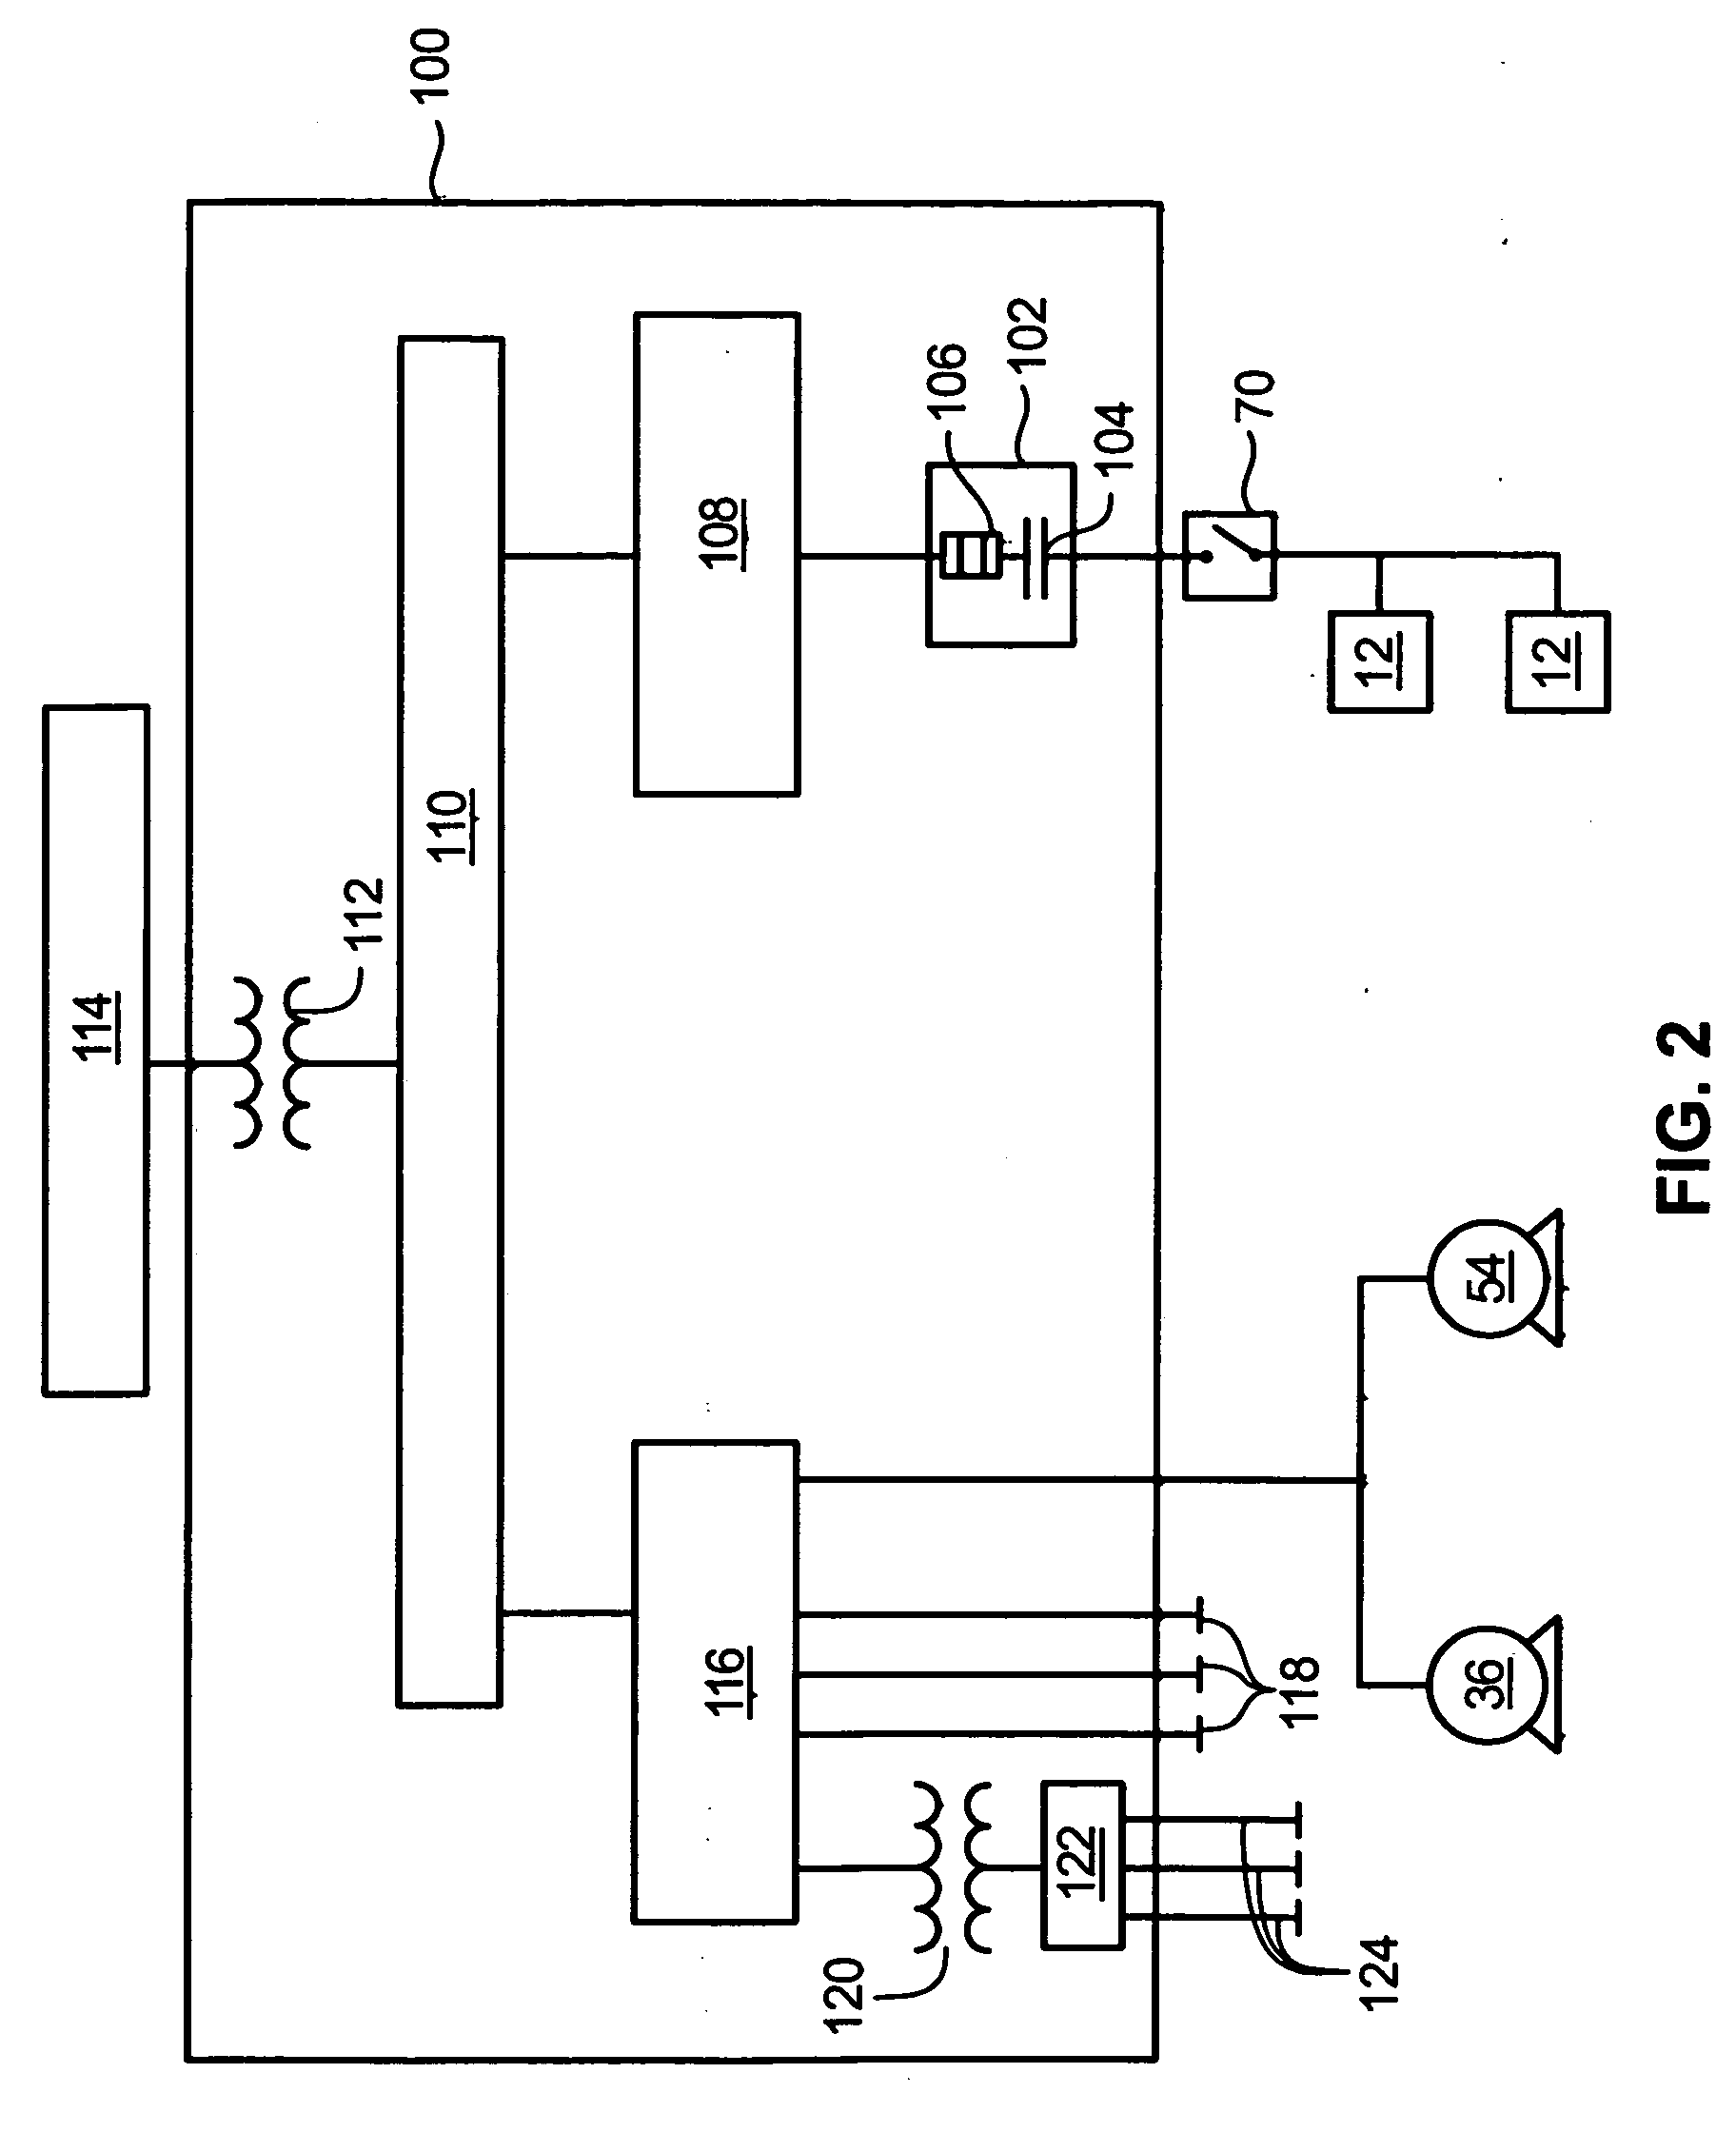 System and method for optimizing efficiency and power output from a vanadium redox battery energy storage system